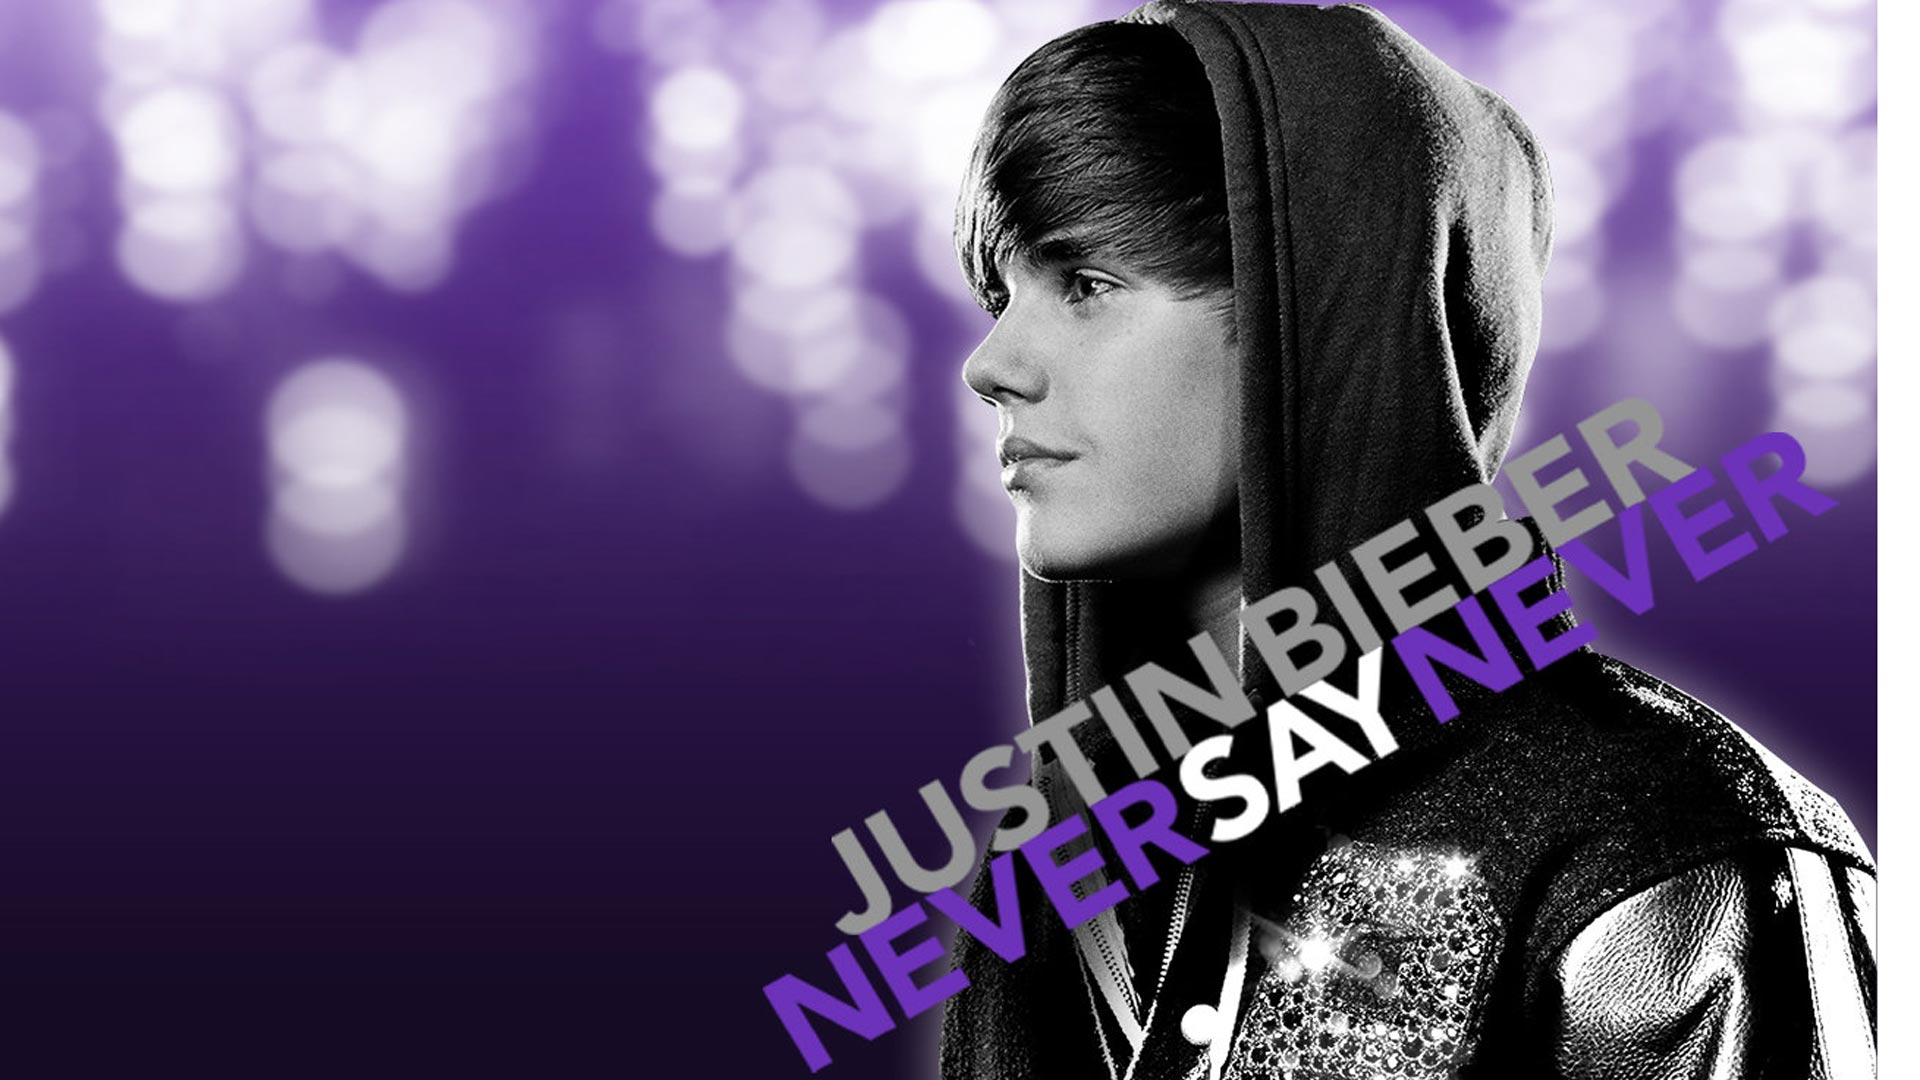 Justin Bieber Style HD Wallpaper And Make This For Your